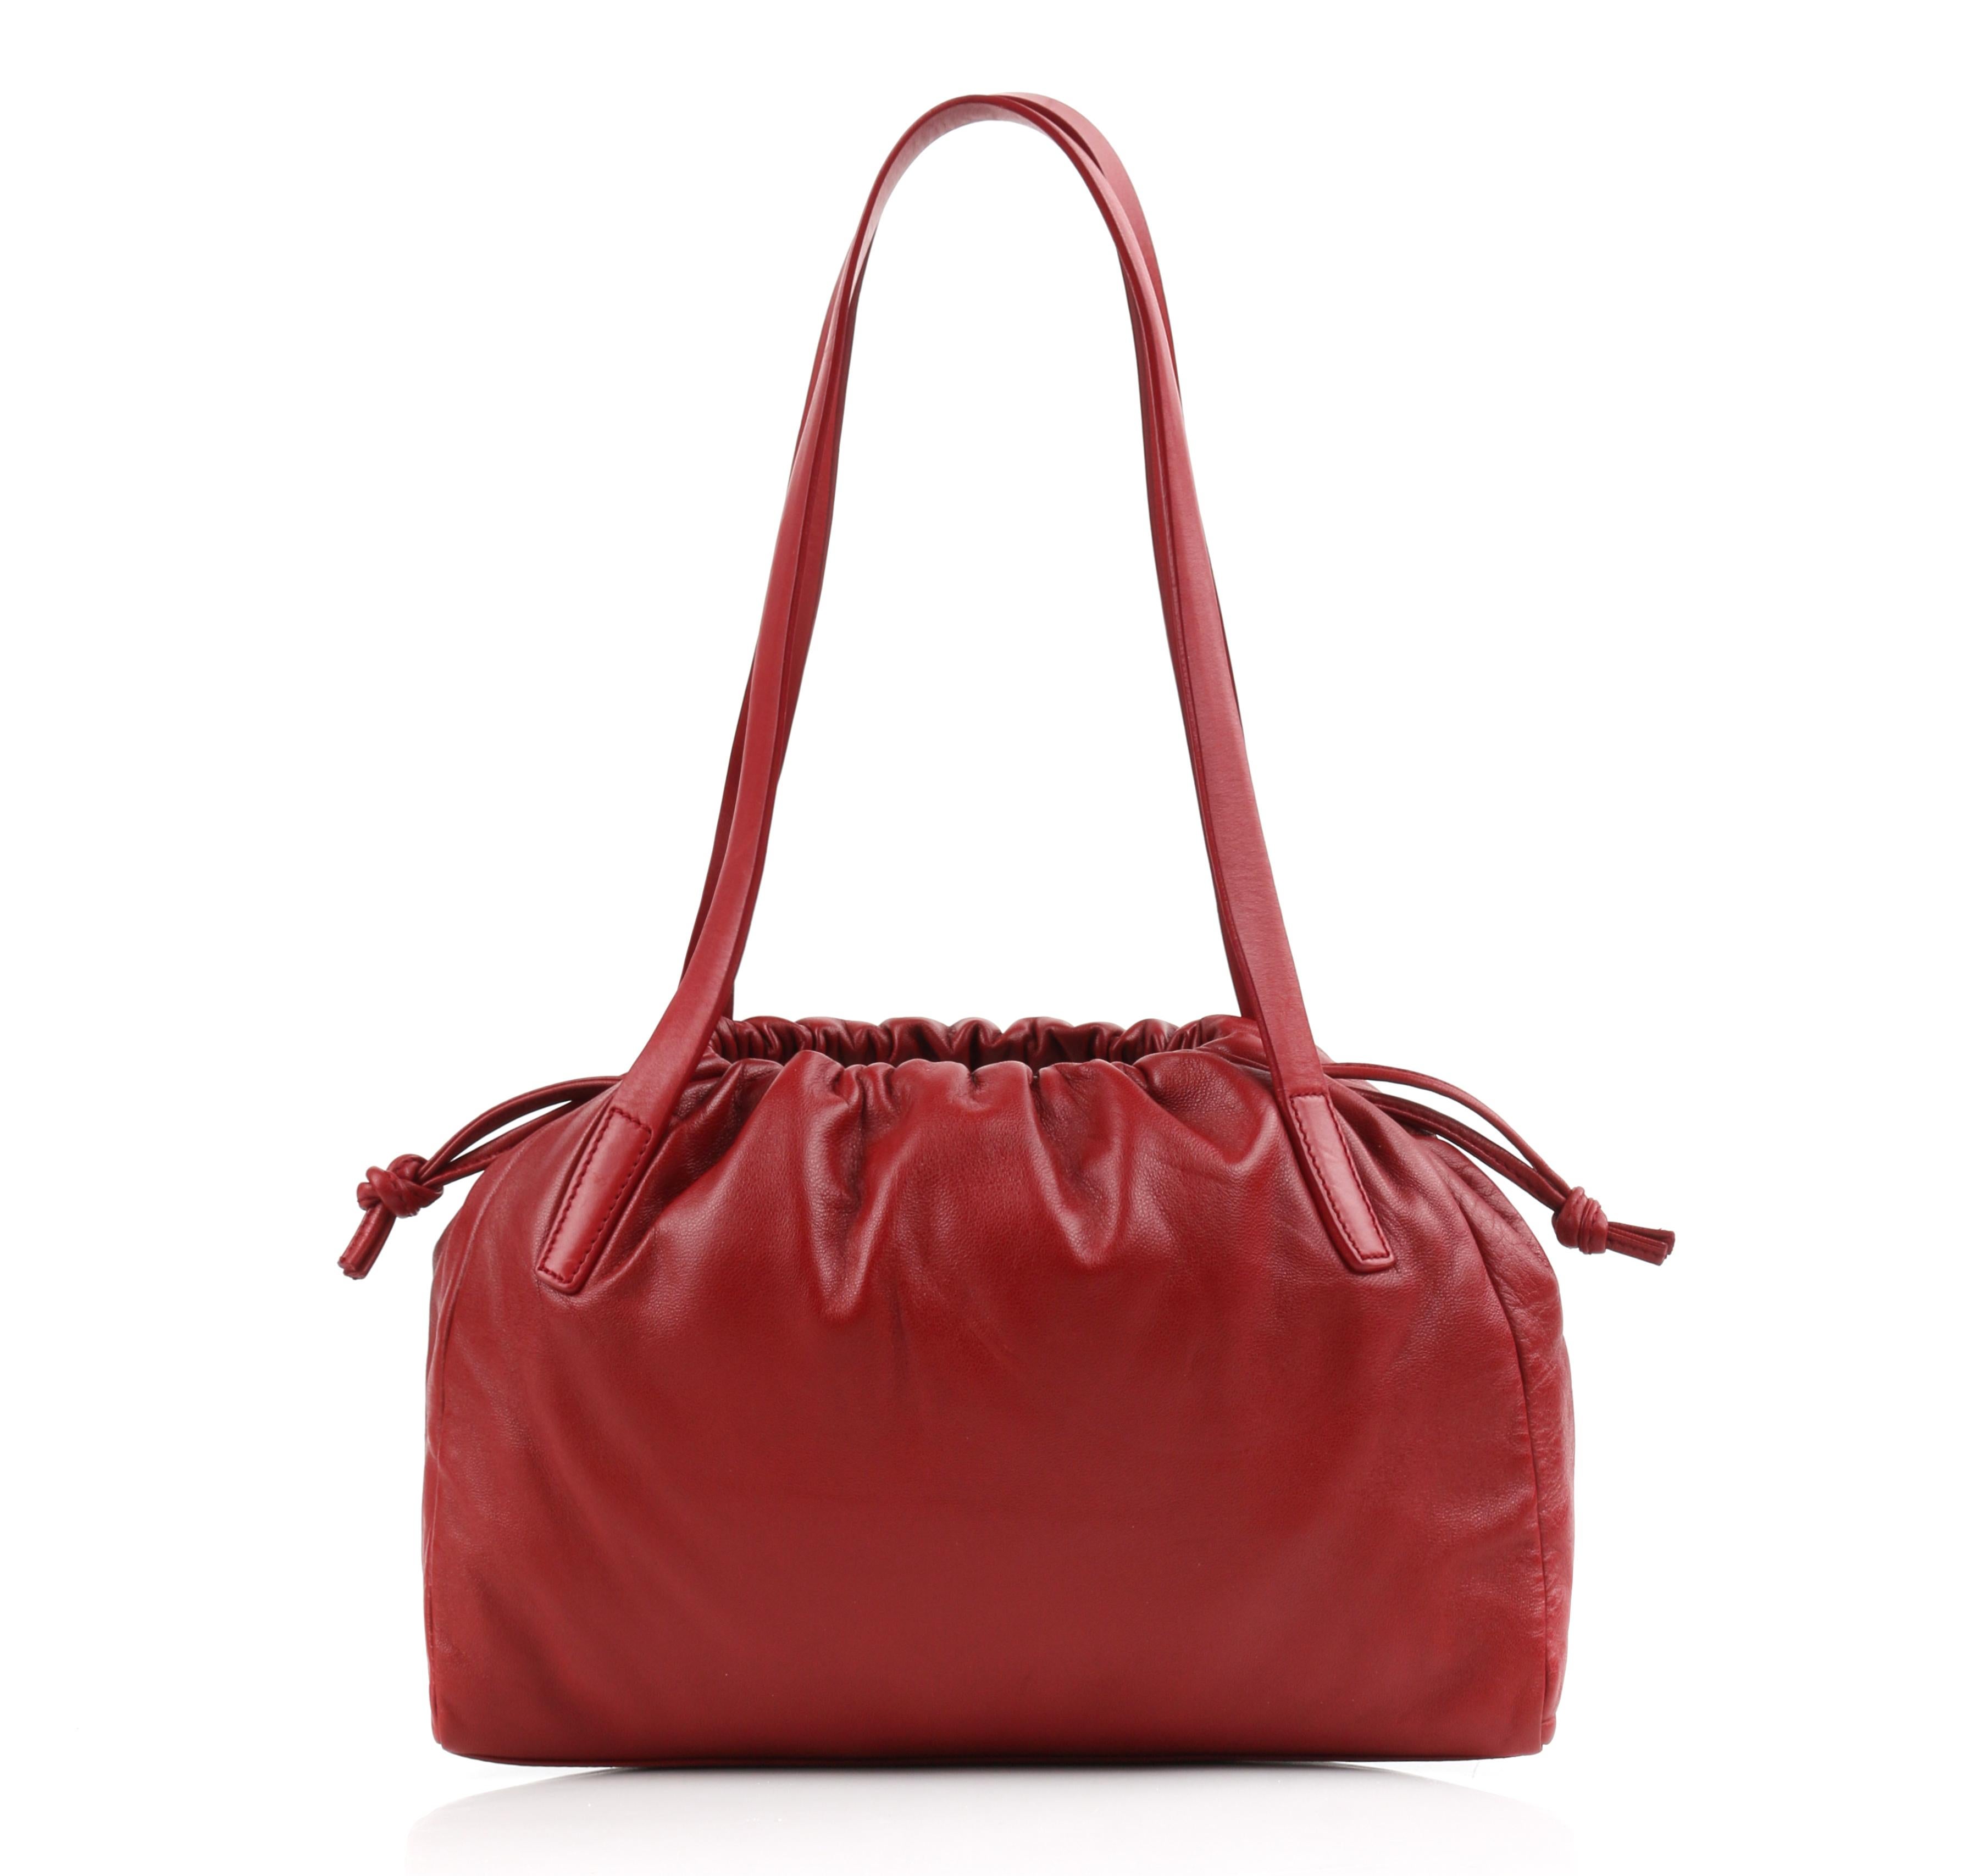 LOEWE Red Napa Leather Drawstring Top Dual Handle Shoulder Hobo Bag
  
Brand / Manufacturer: Loewe
Designer: Jonathan Anderson
Style: Shoulder bag
Color(s): Ruby red (exterior); black (interior)
Lined: Yes
Unmarked Fabric Content: Napa leather